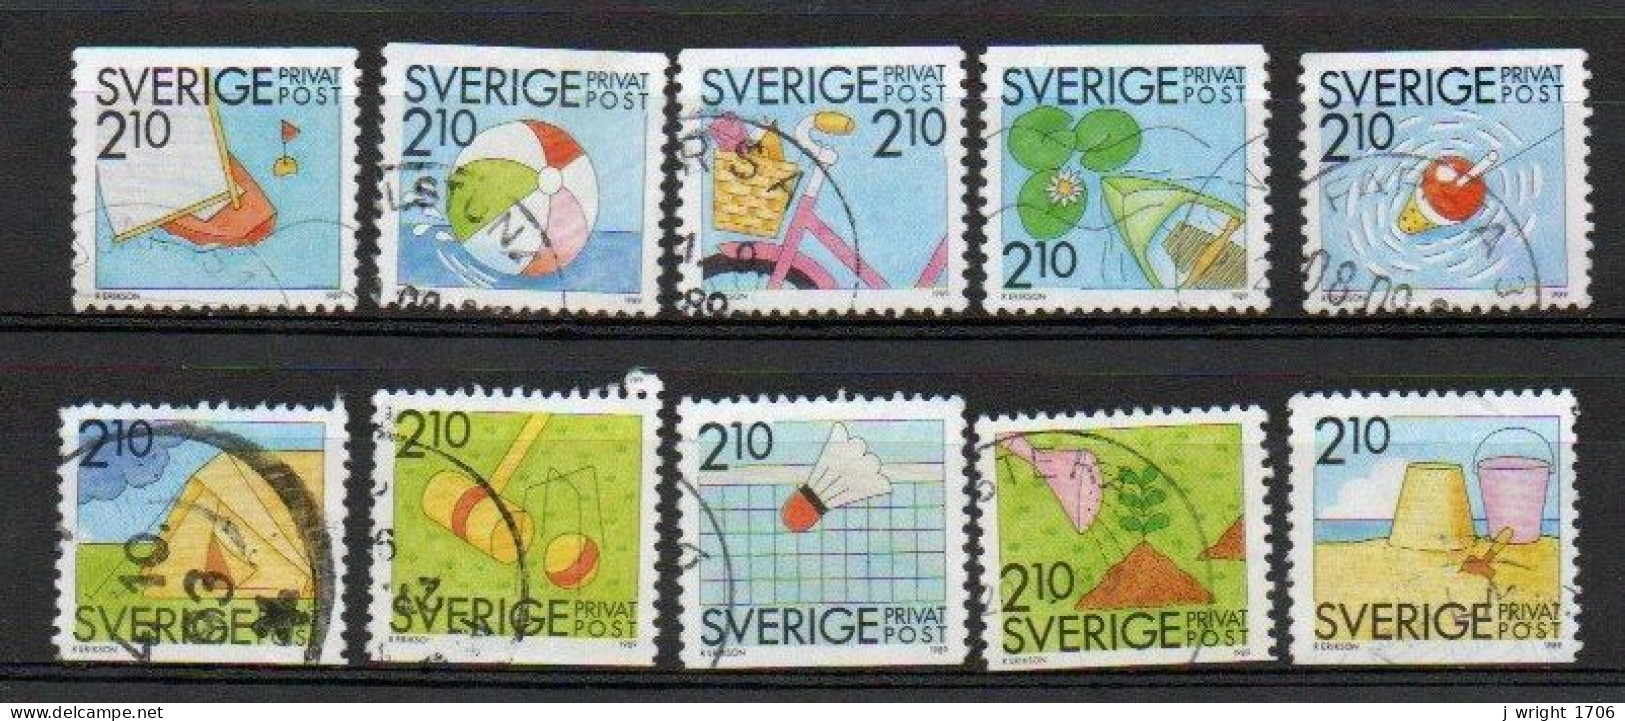 Sweden, 1989, Redate Stamps/Summer Activities, Set, USED - Used Stamps